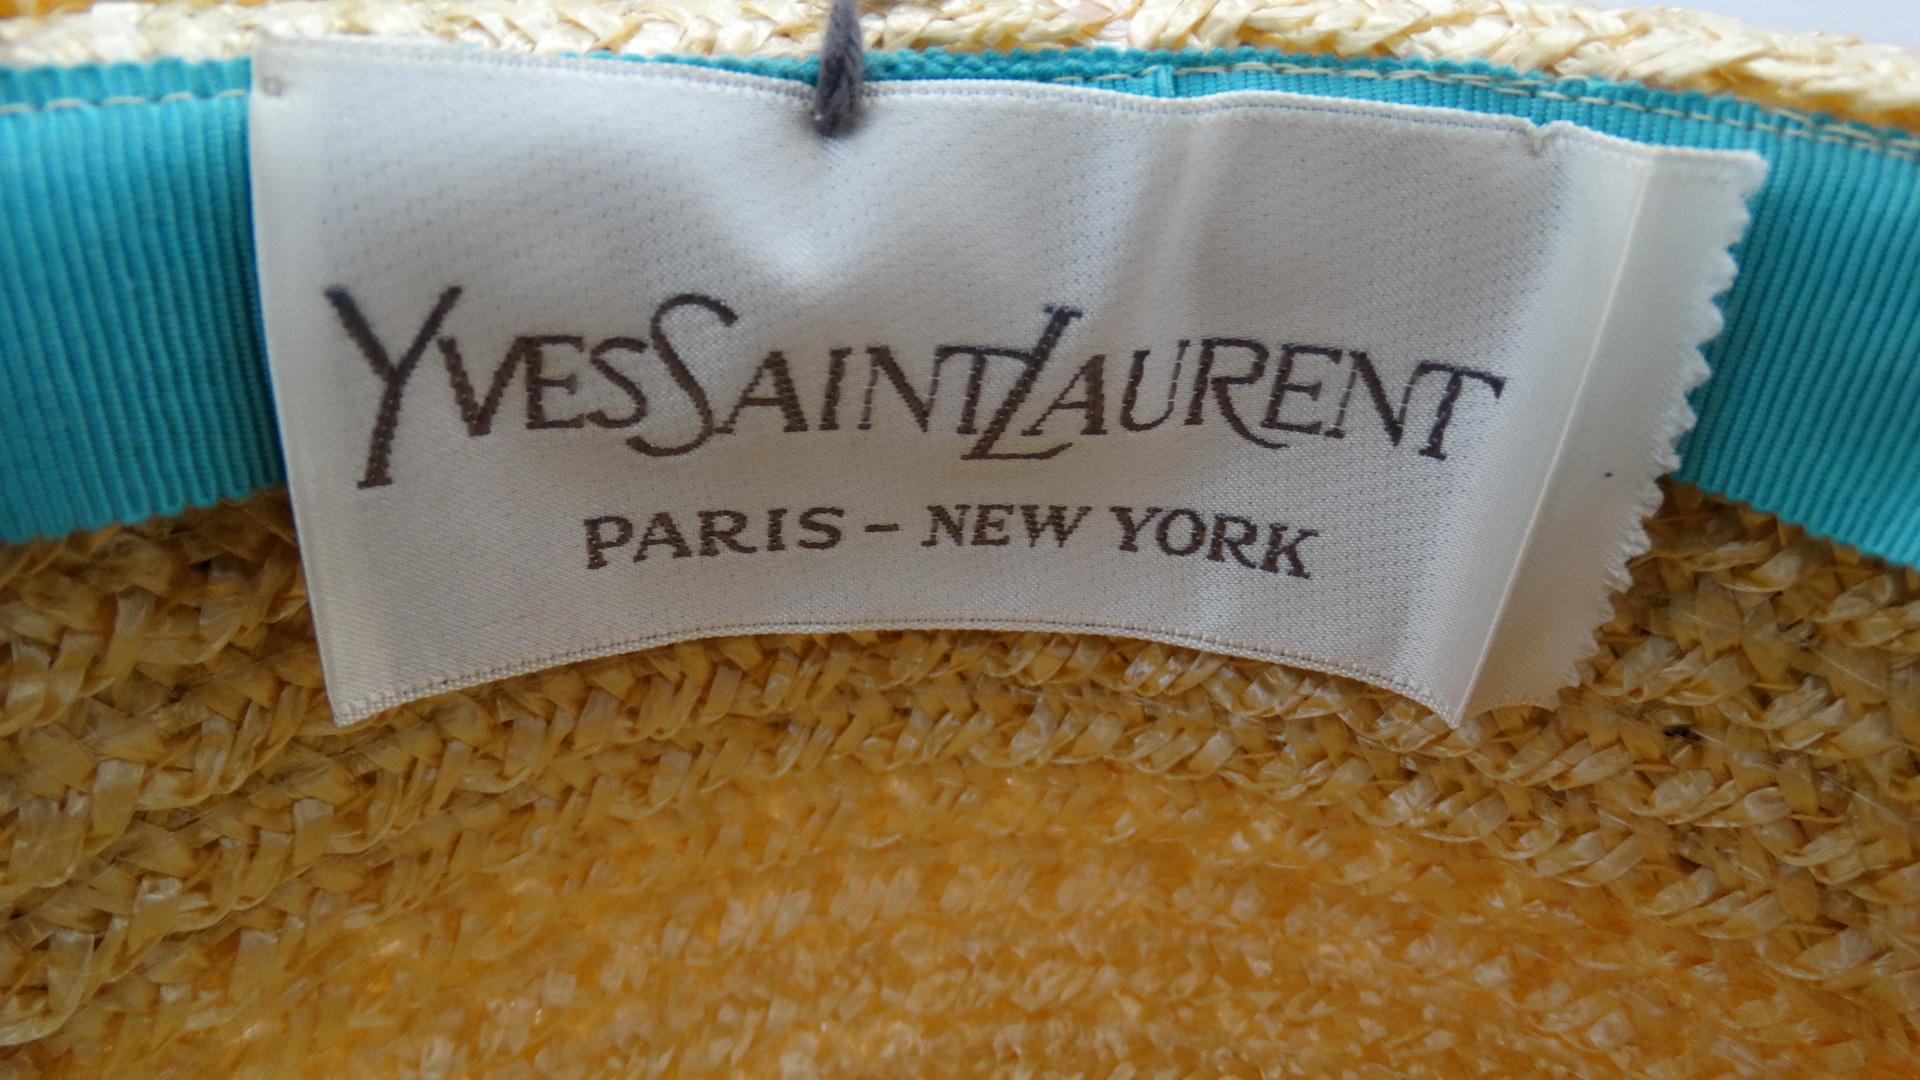 Incredible straw boater hat from designer Yves Saint Laurent circa the 1960s! Golden yellow woven straw in the classic boater style construction. Accented with thick band of striped ribbon around the base of the hat, with a bow on the side. Yves